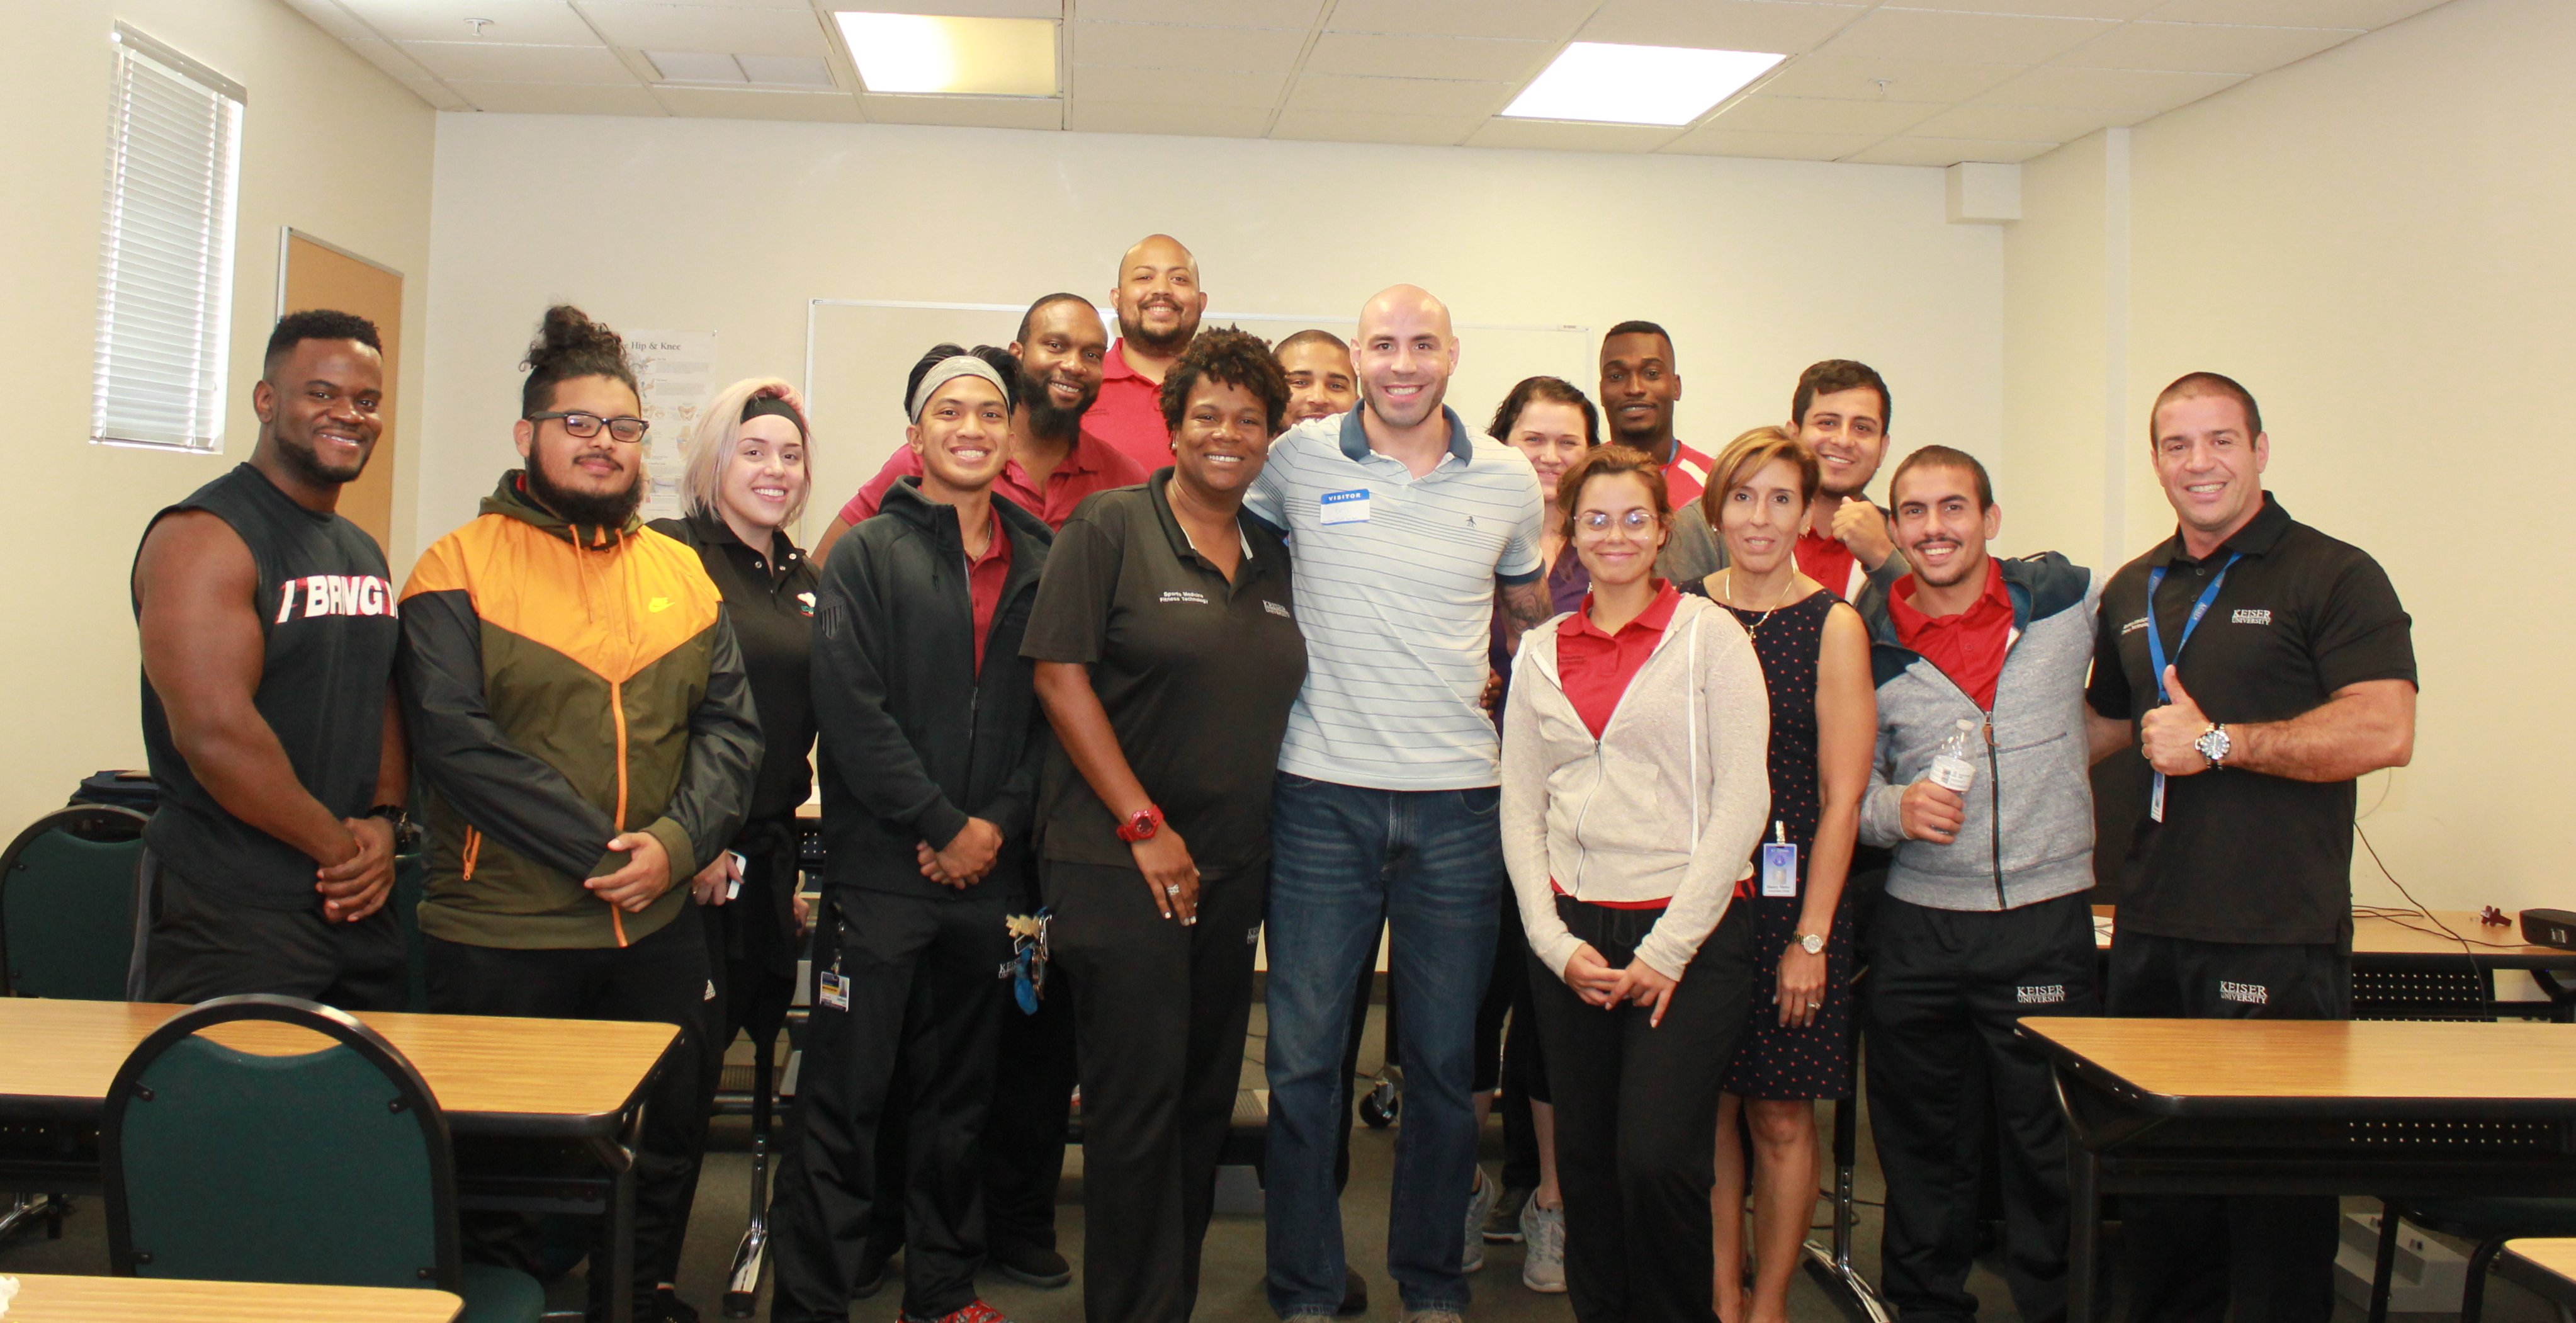 Orlando Students Attended Seminar with Ben Saunders, UFC Fighter